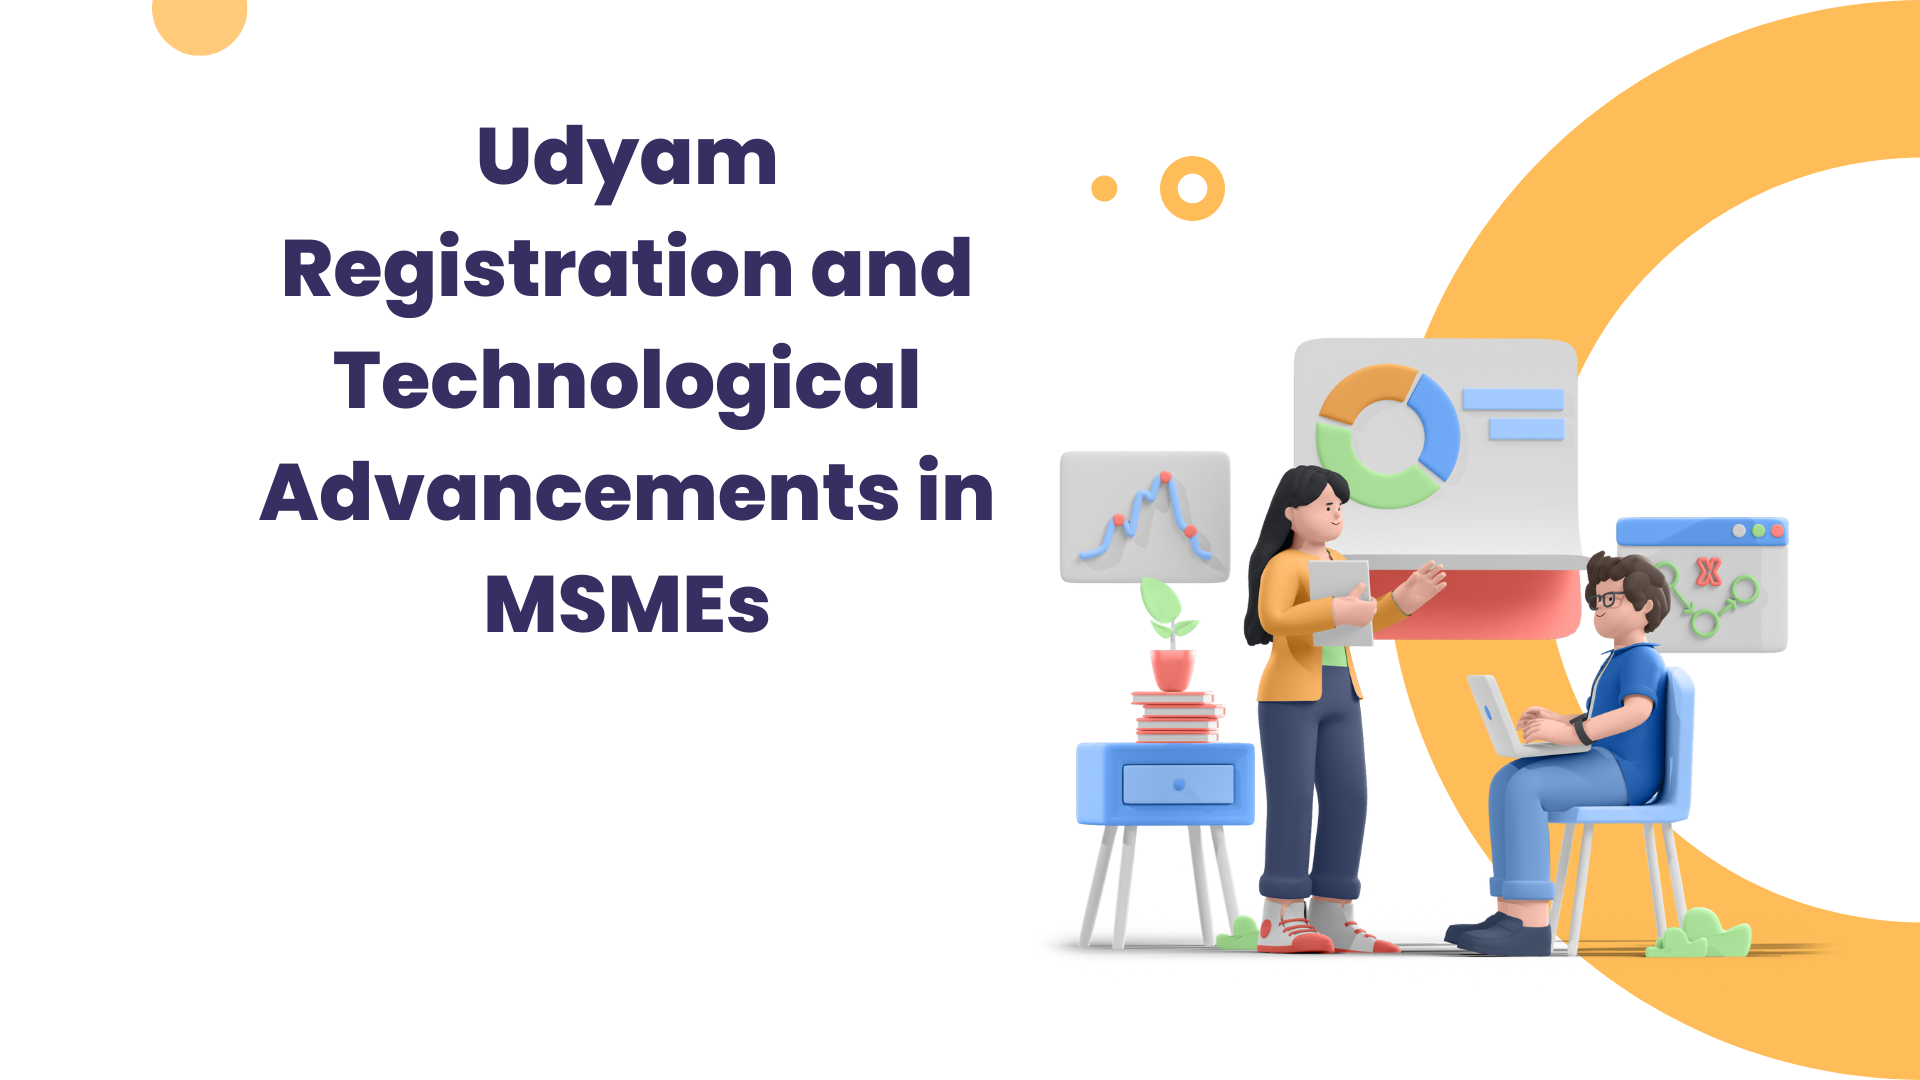 Udyam Registration and Technological Advancements in MSMEs